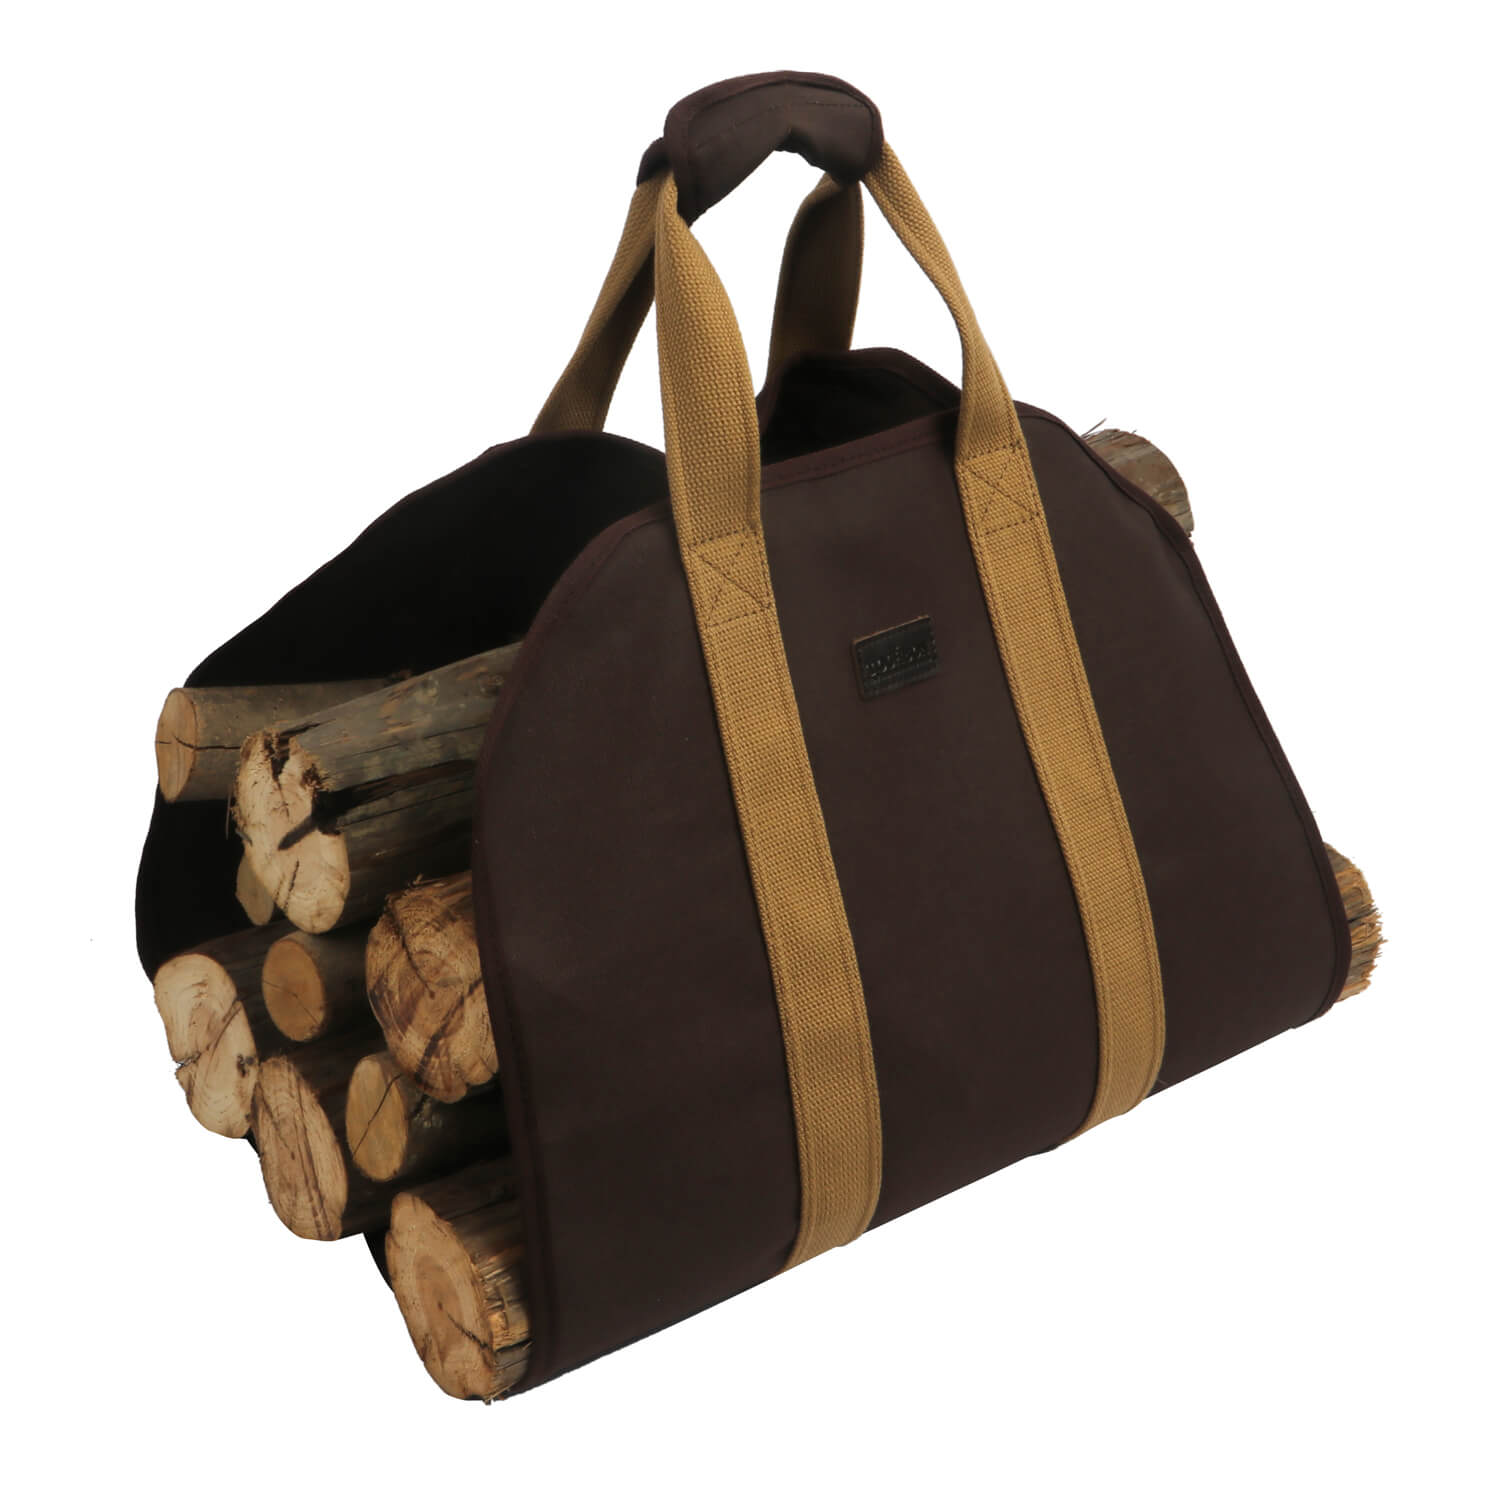 TOURBON Canvas Fireplace Wood Stove Accessories Firewood Log Carrier Tote-TOURBONSTORE